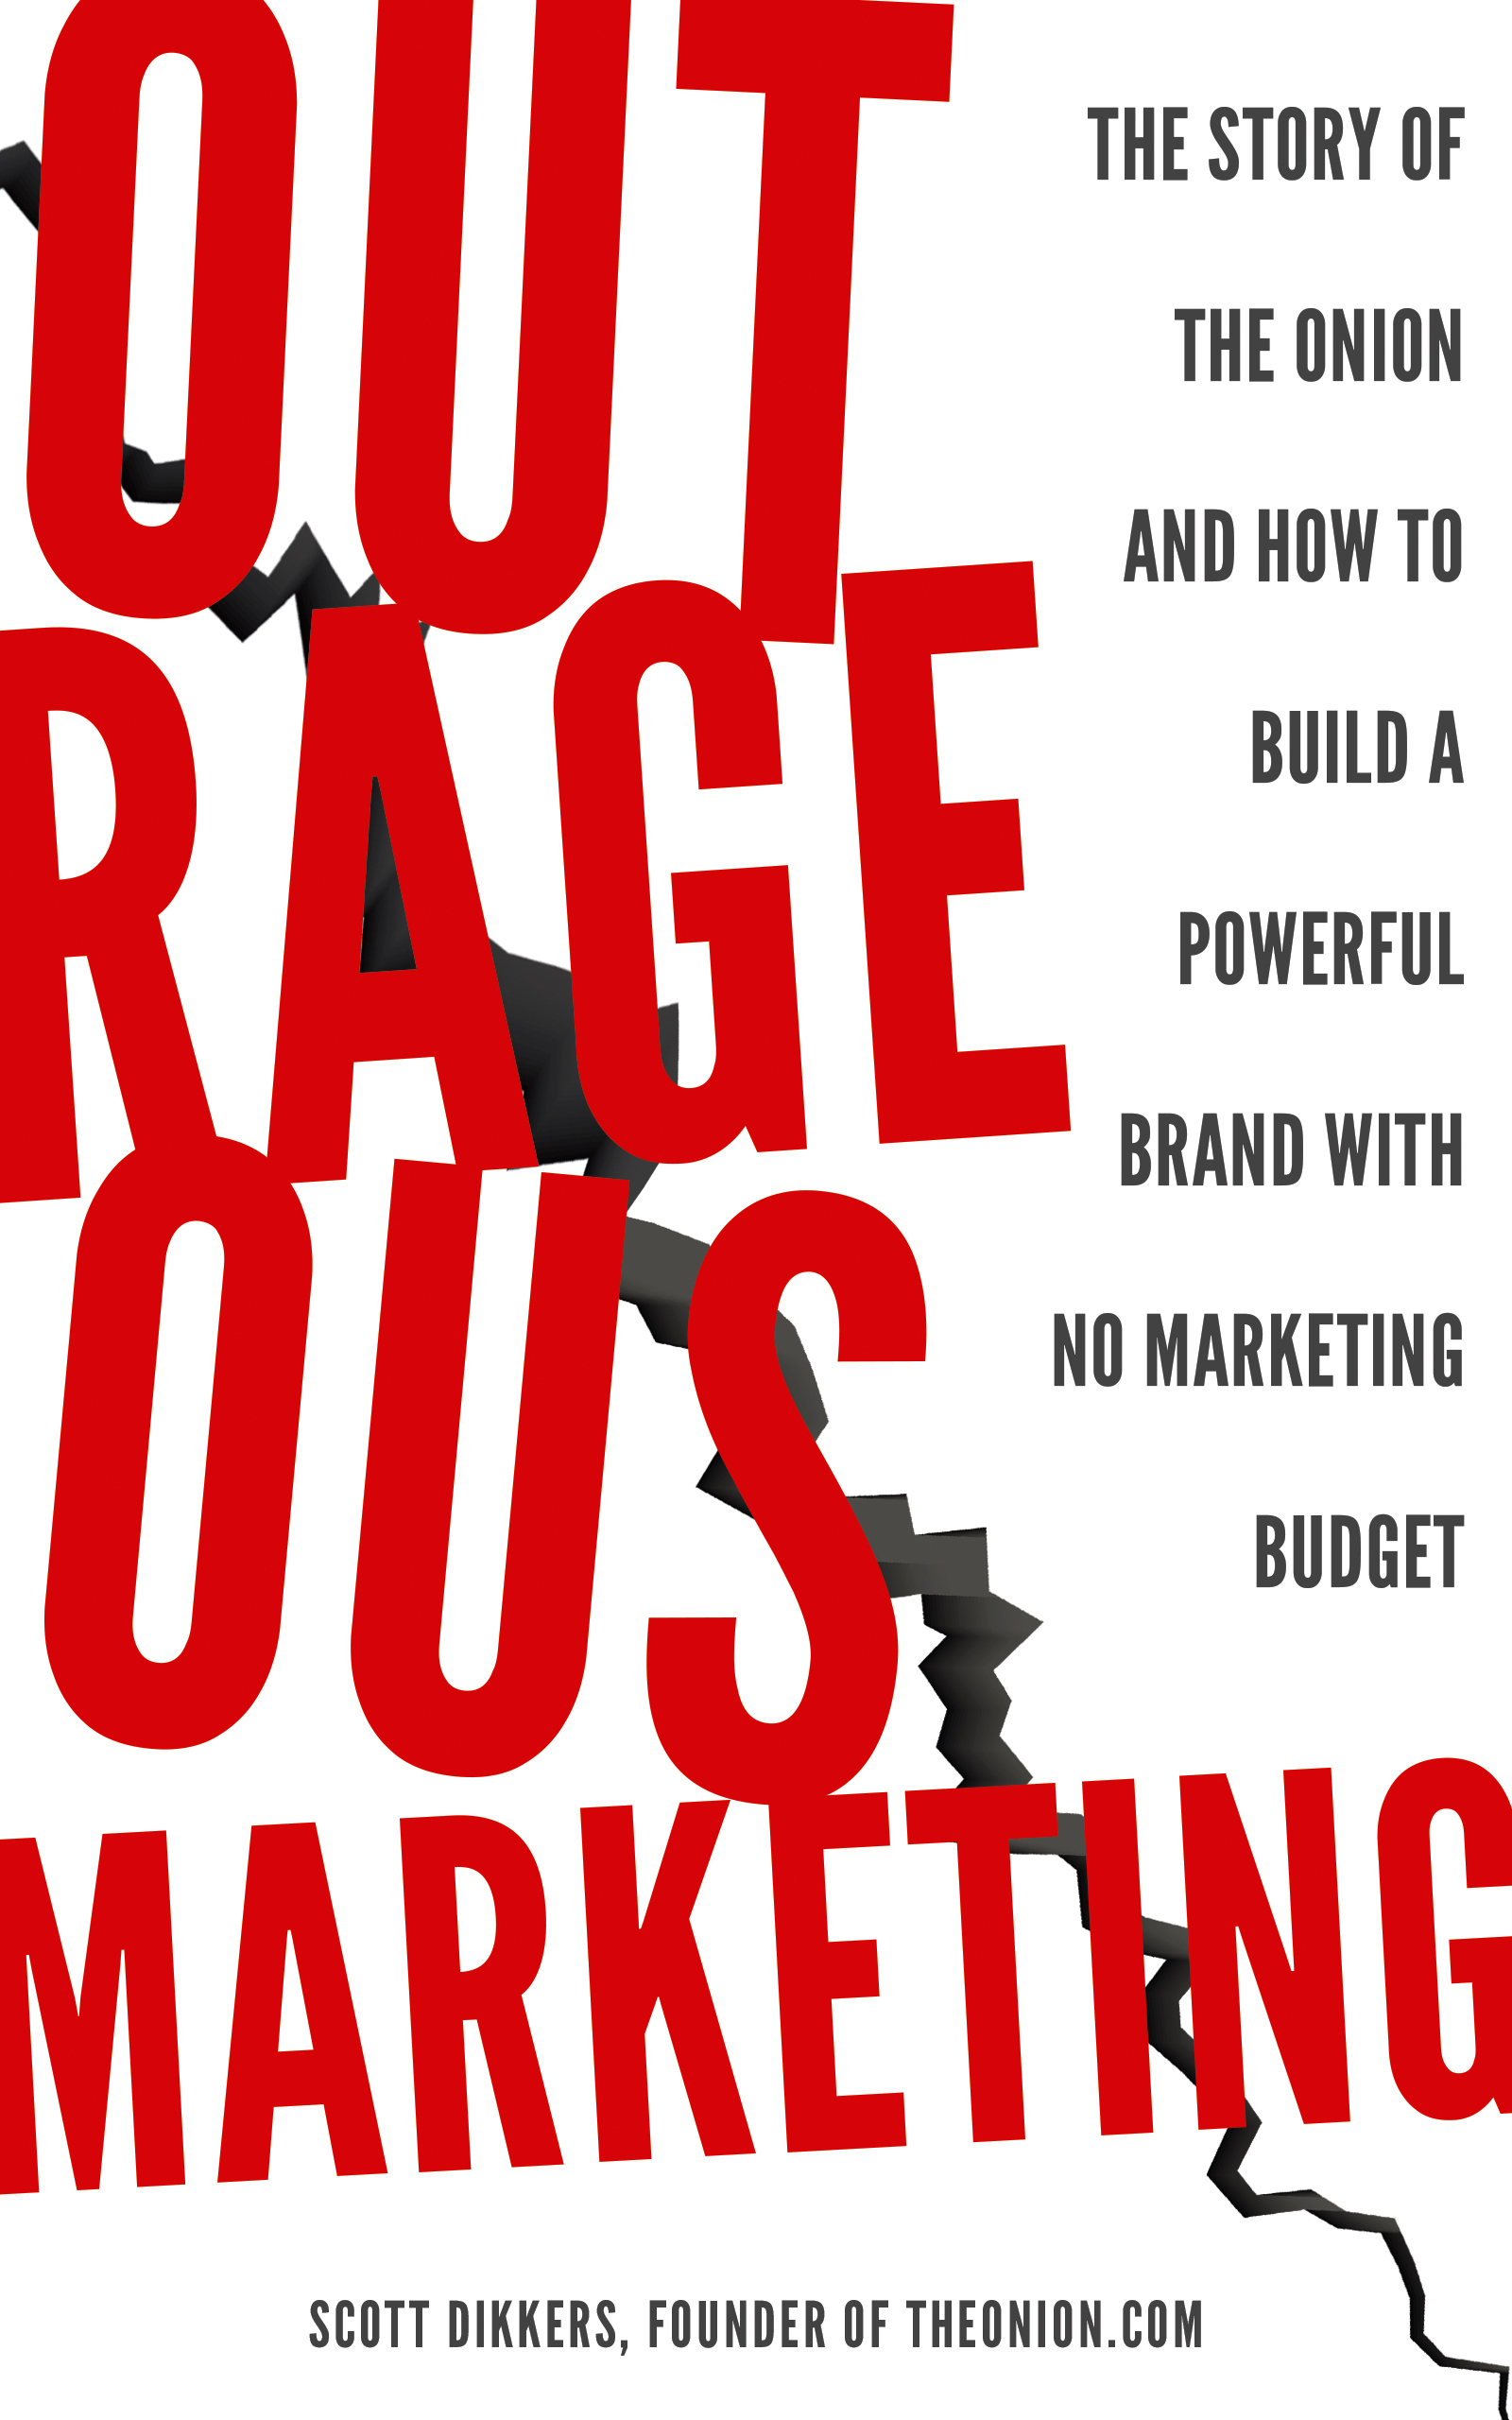 Om cover kindle 1 outrageous marketing